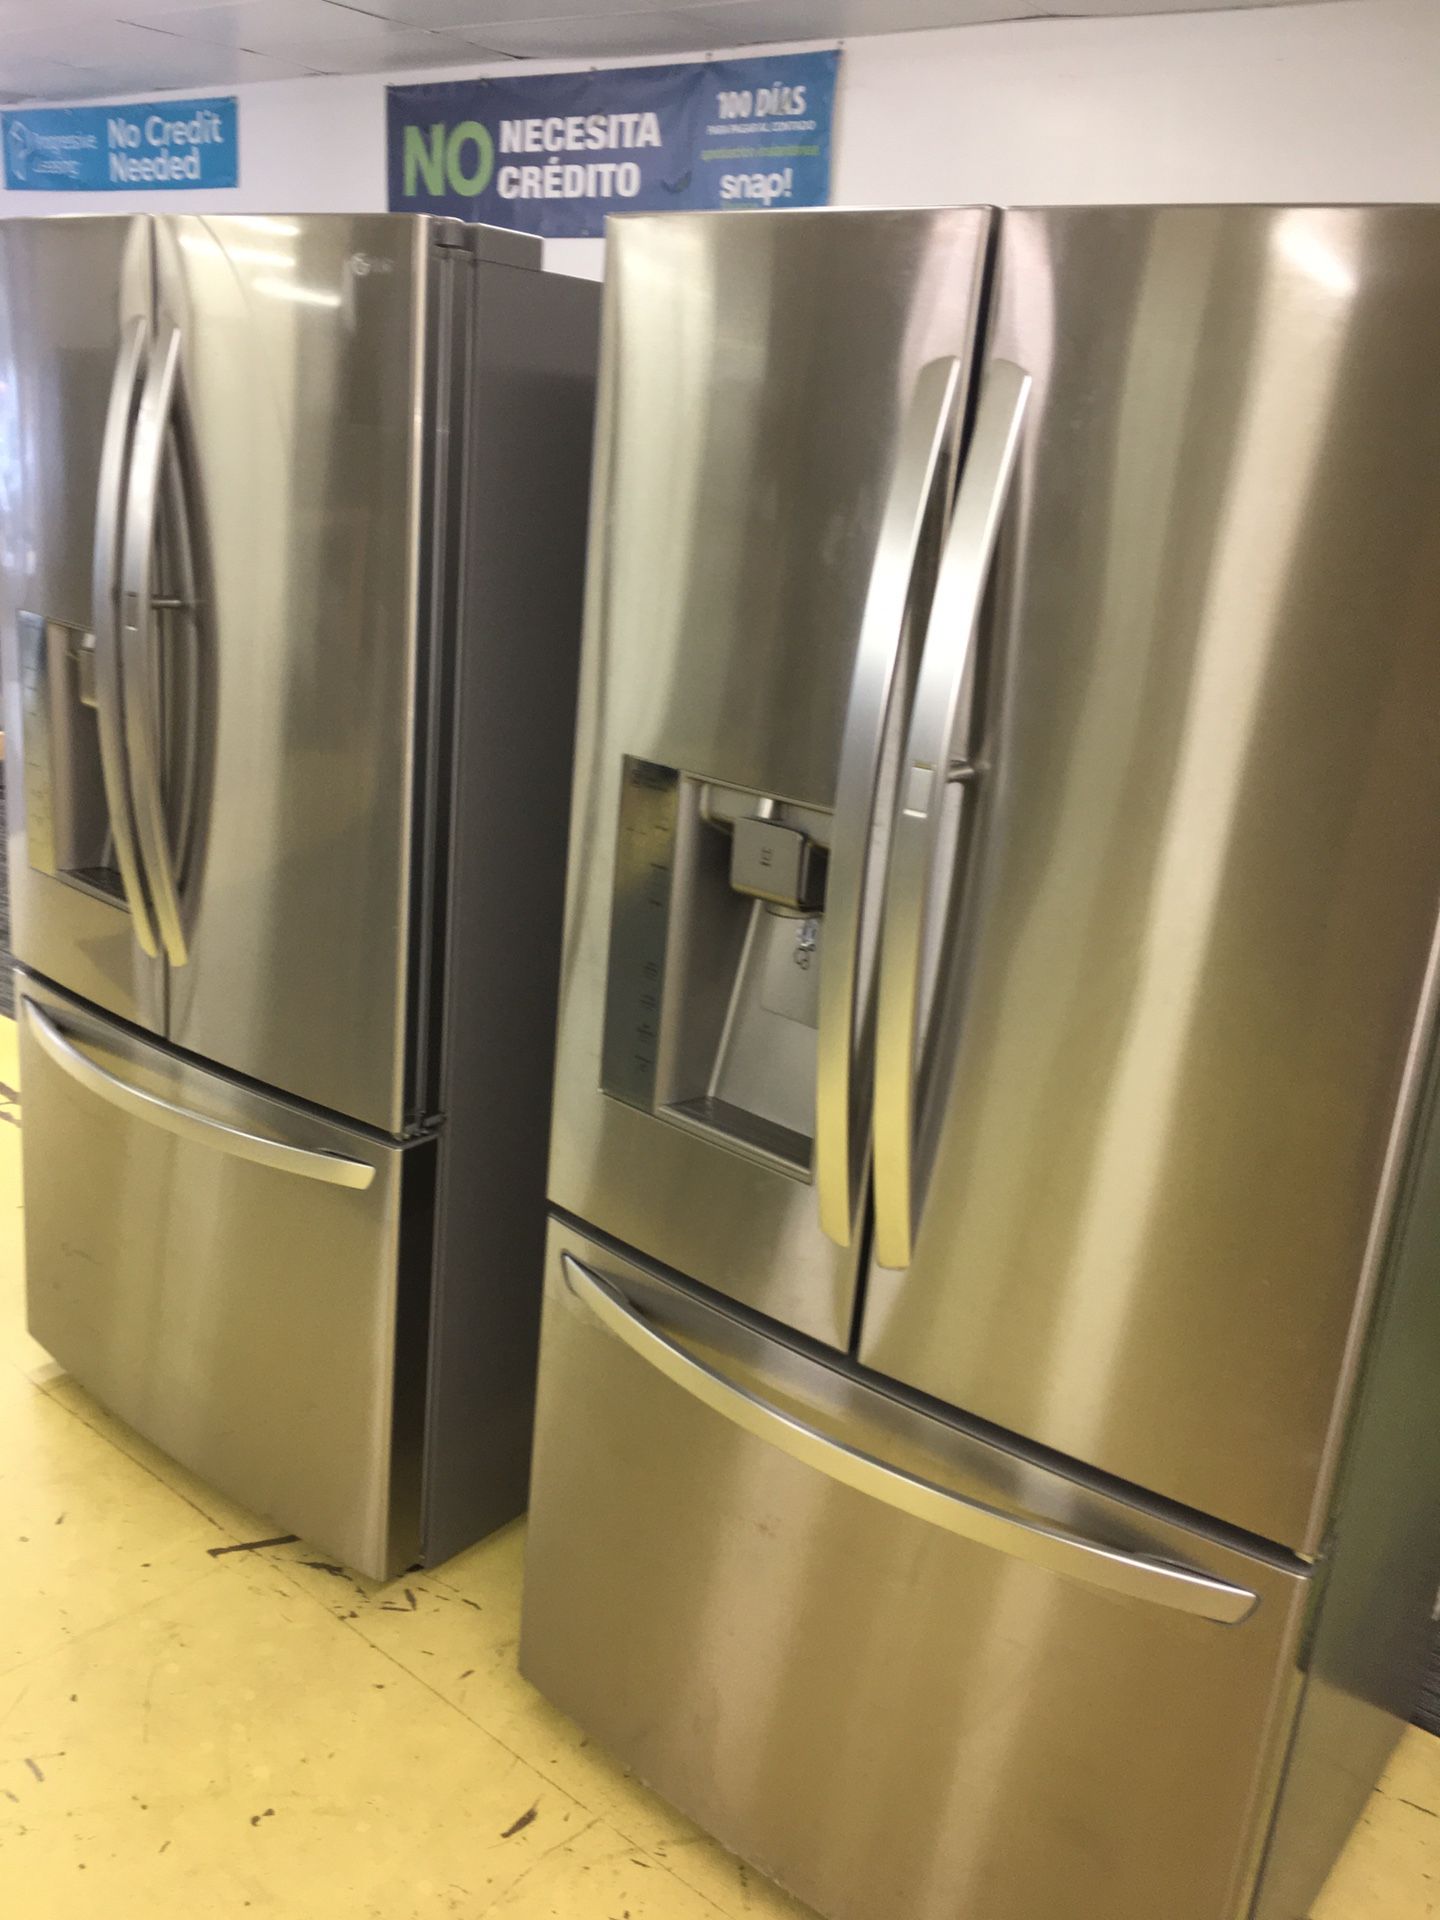 LG Stainless Steel French Door Refrigerator Scraches Dent With Chosecase on the Door No Credit Needed Just $79 The Down payment Cash price $1,800